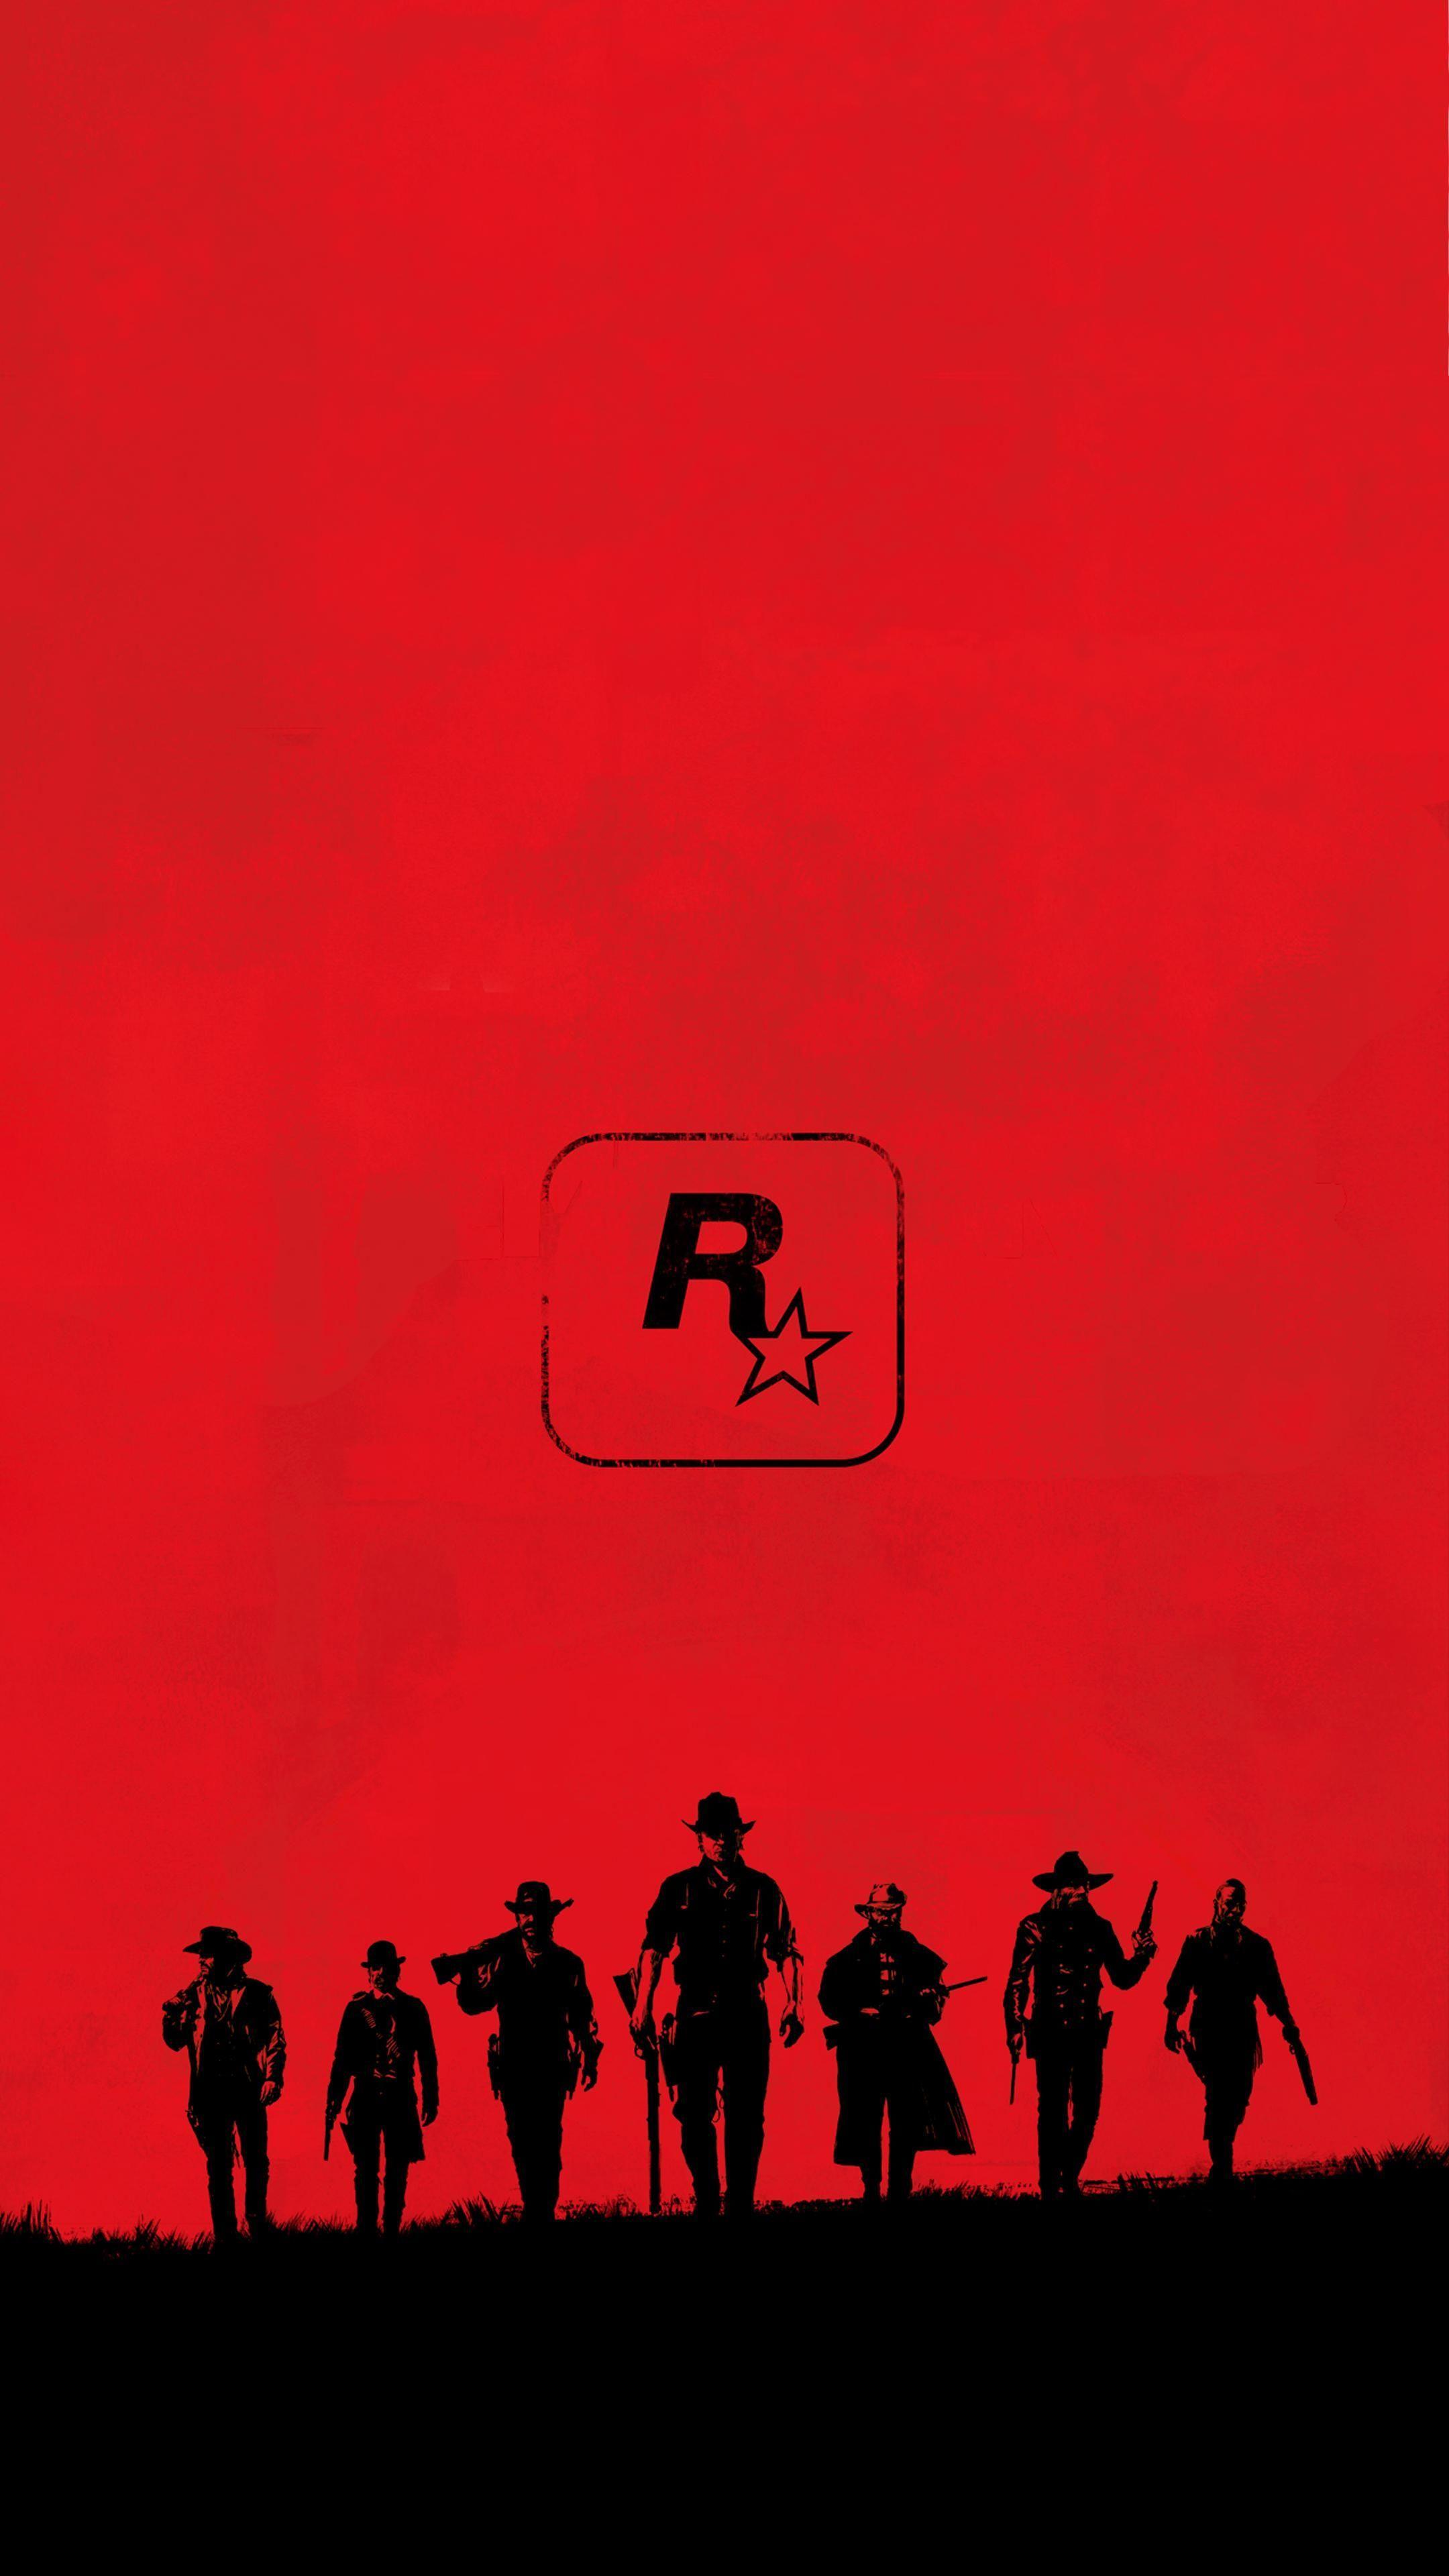 RDR2 cell phone wallpaper. gaming. Red dead redemption